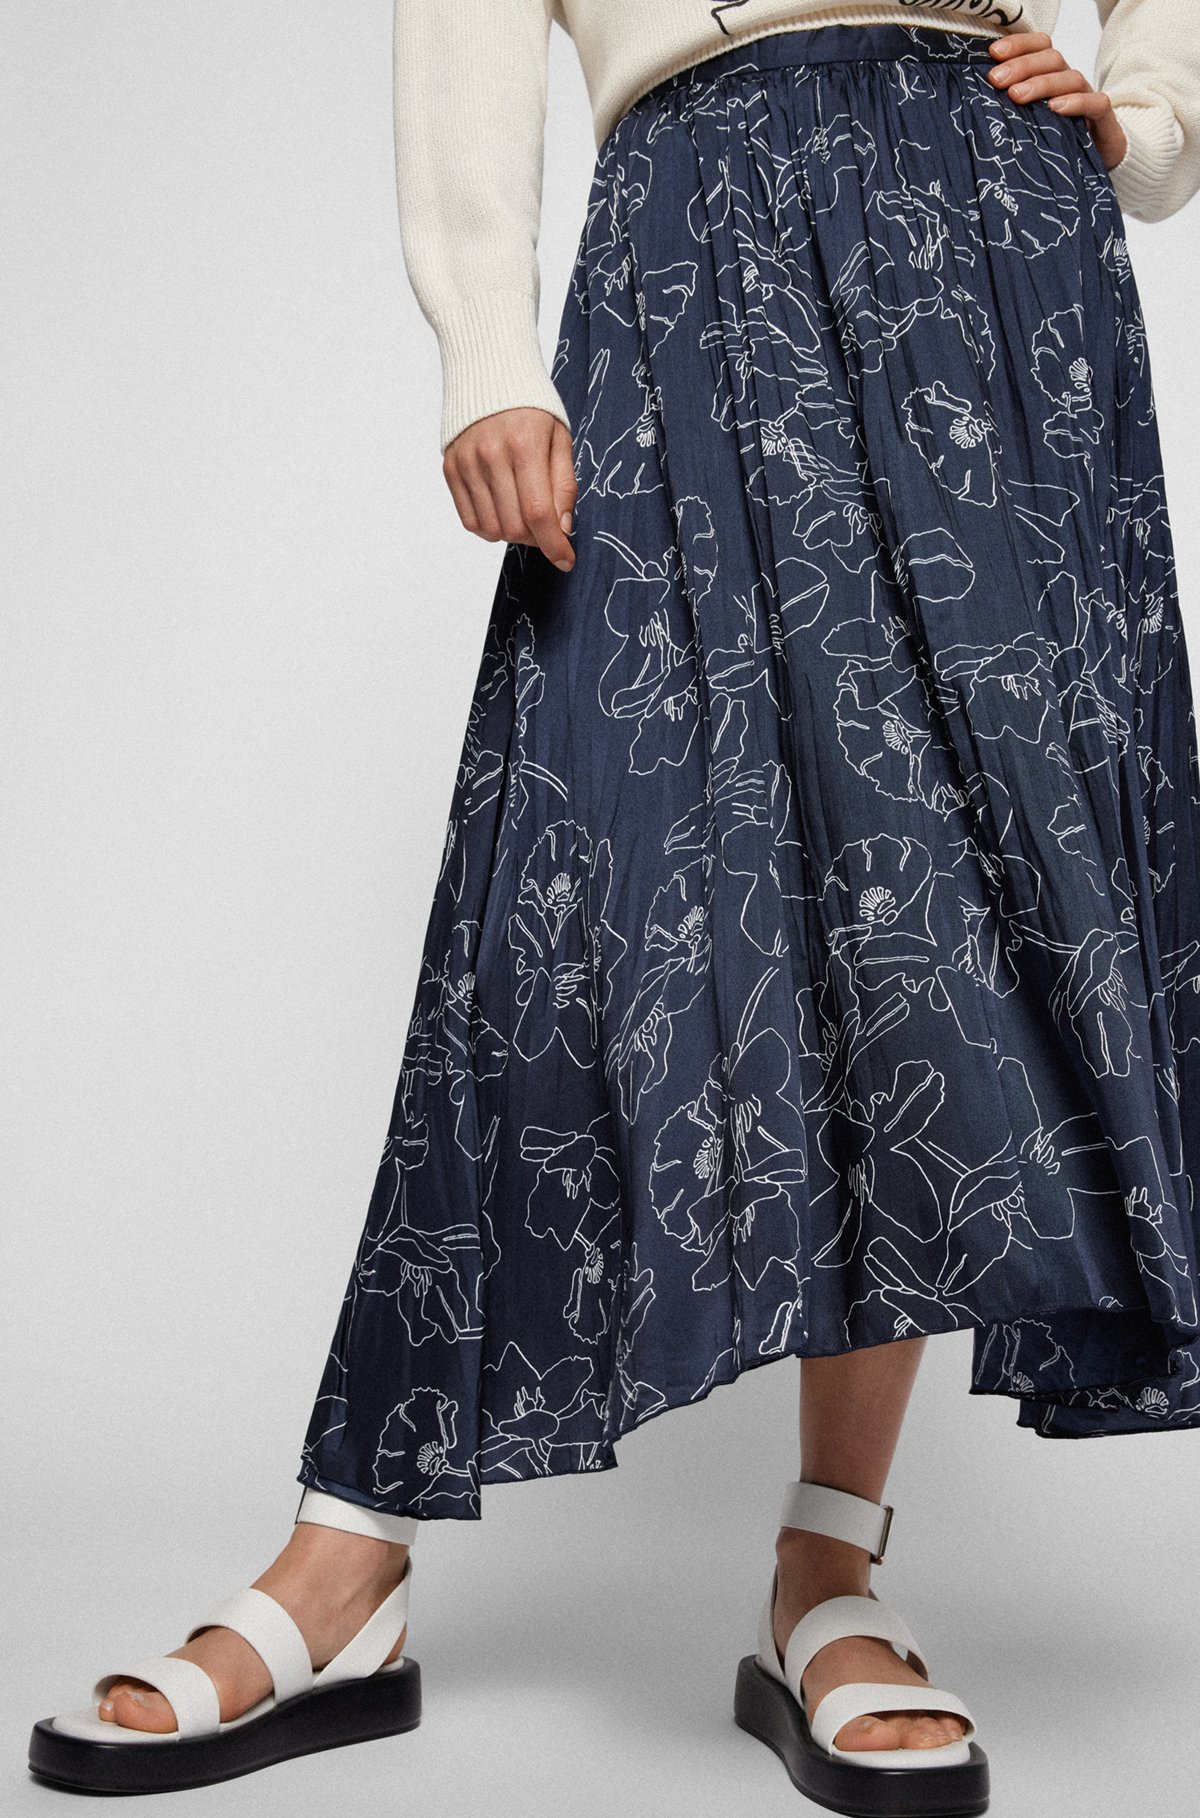 BOSS - Floral-print midi skirt in crinkled recycled fabric